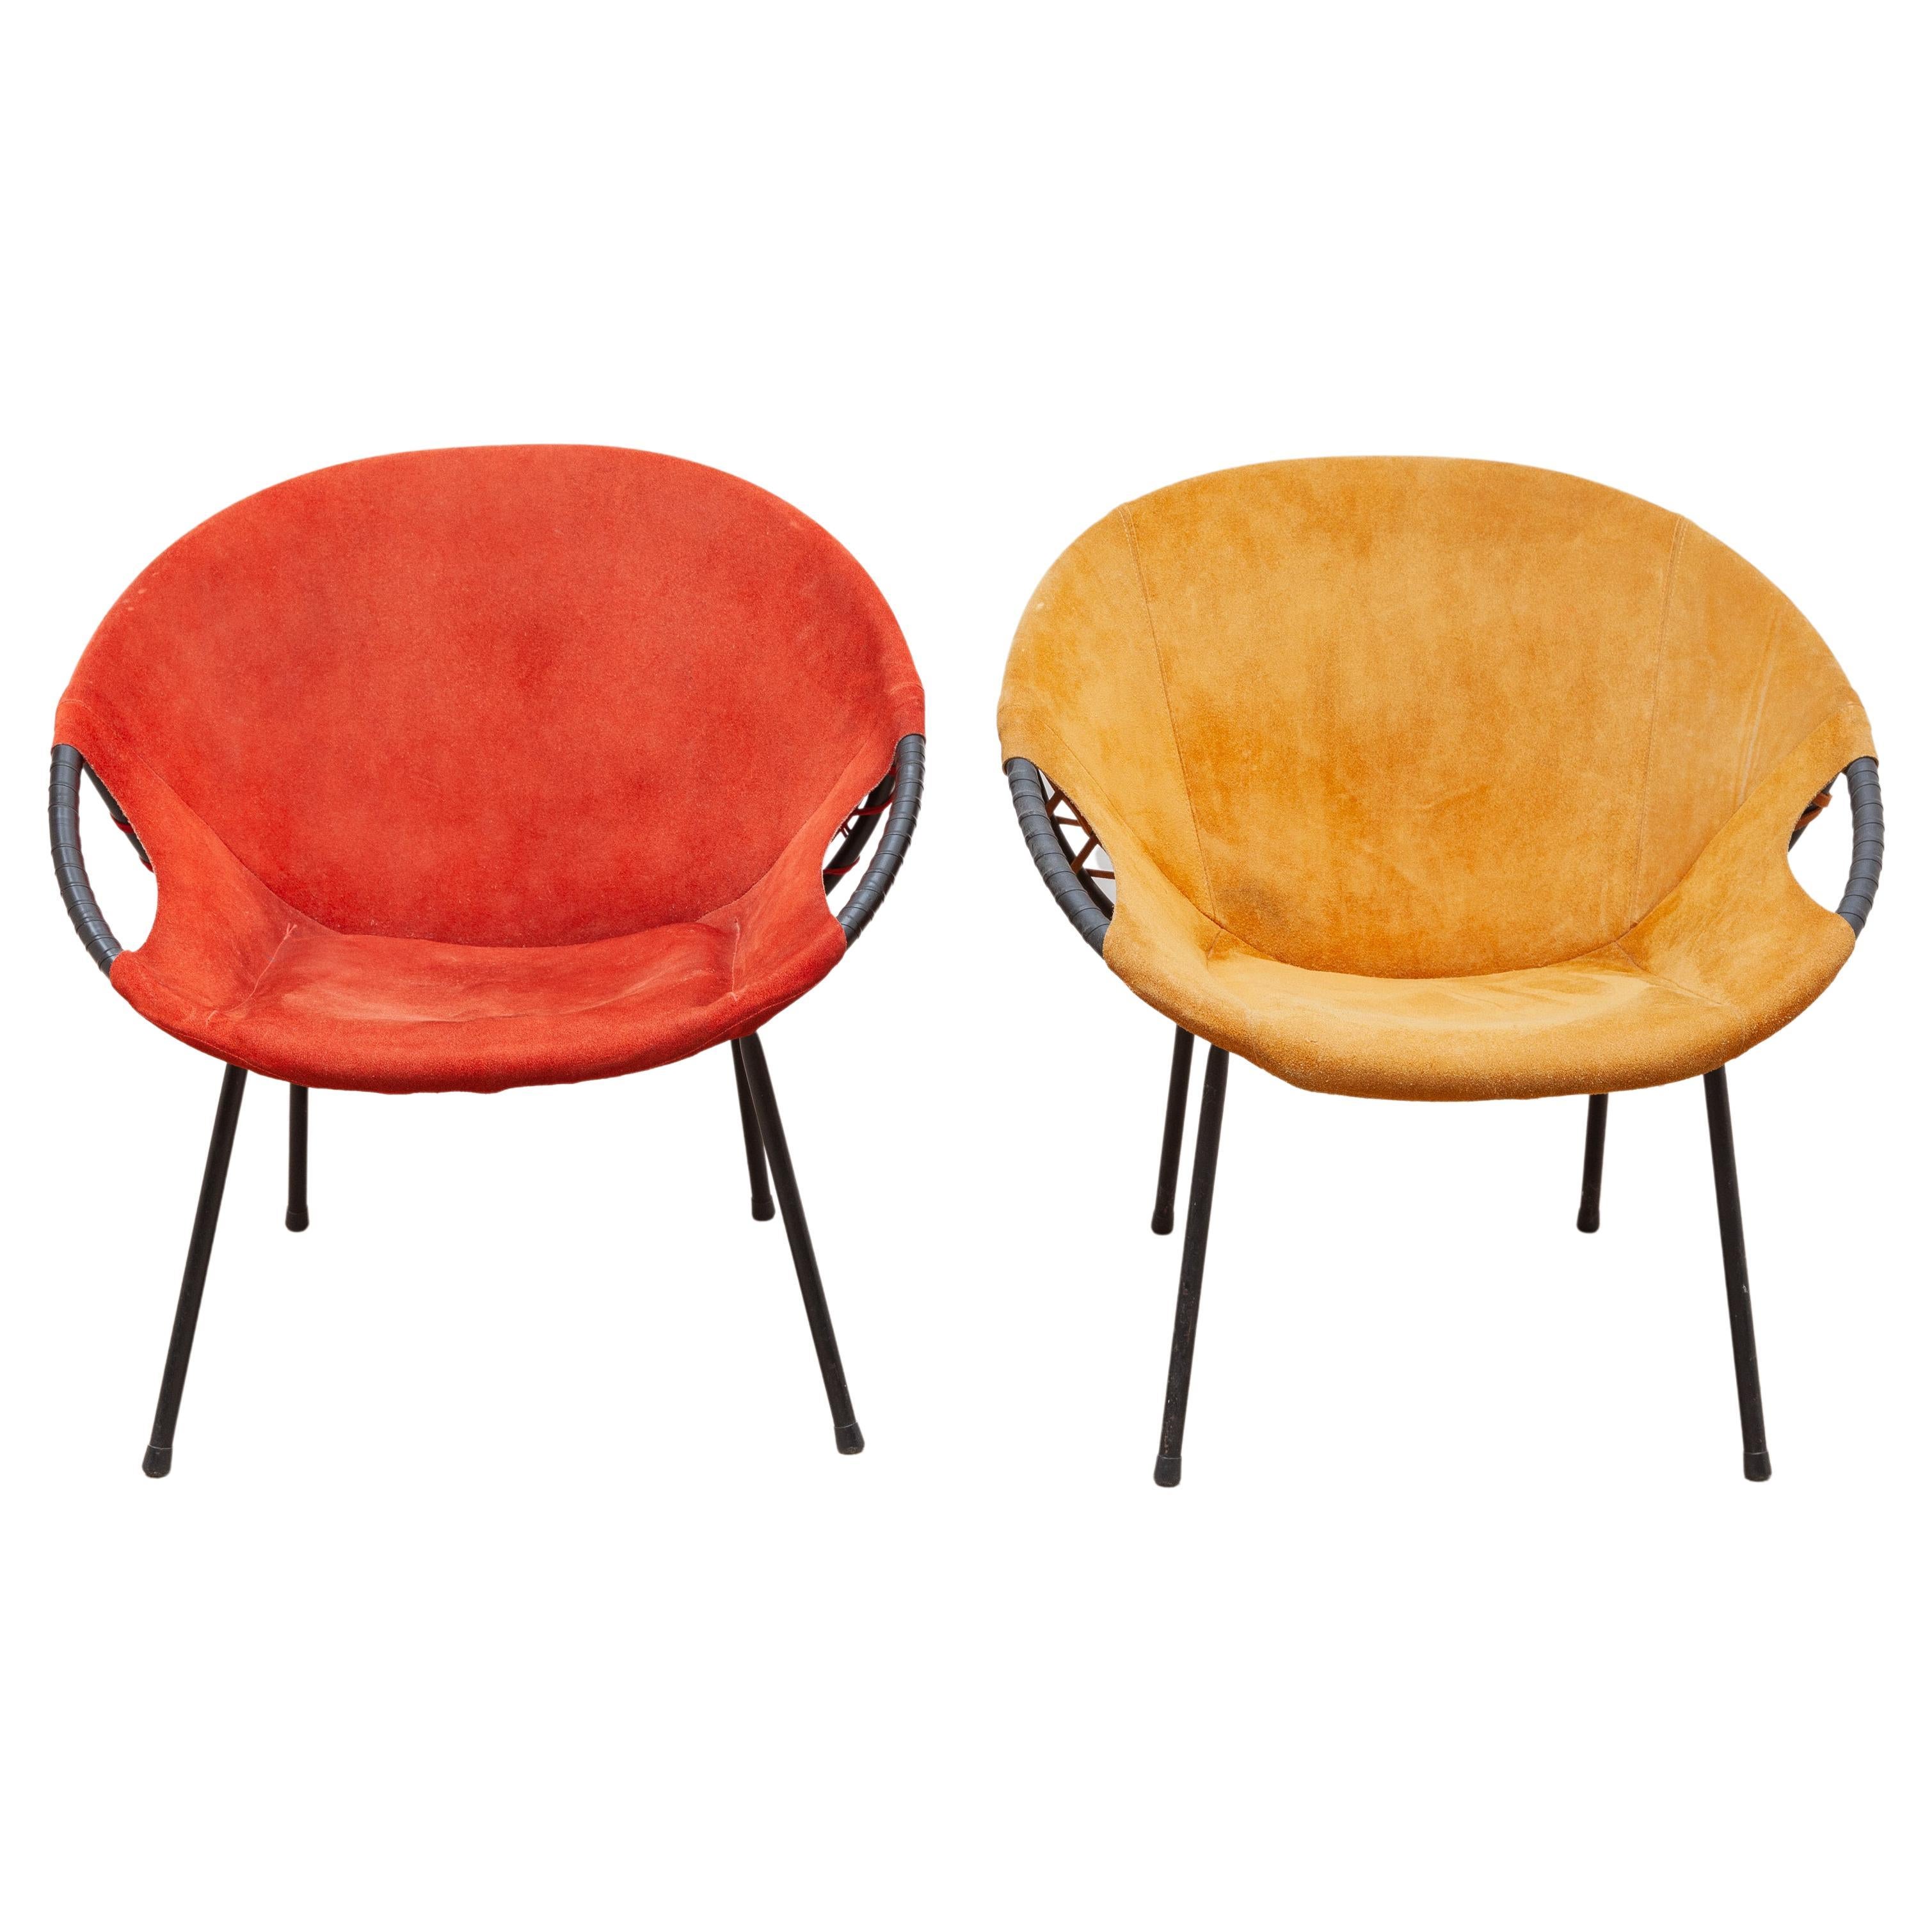 Pair of Yellow and Red Natural Suede Leather Lounge Fifties Chairs by Hans Olsen